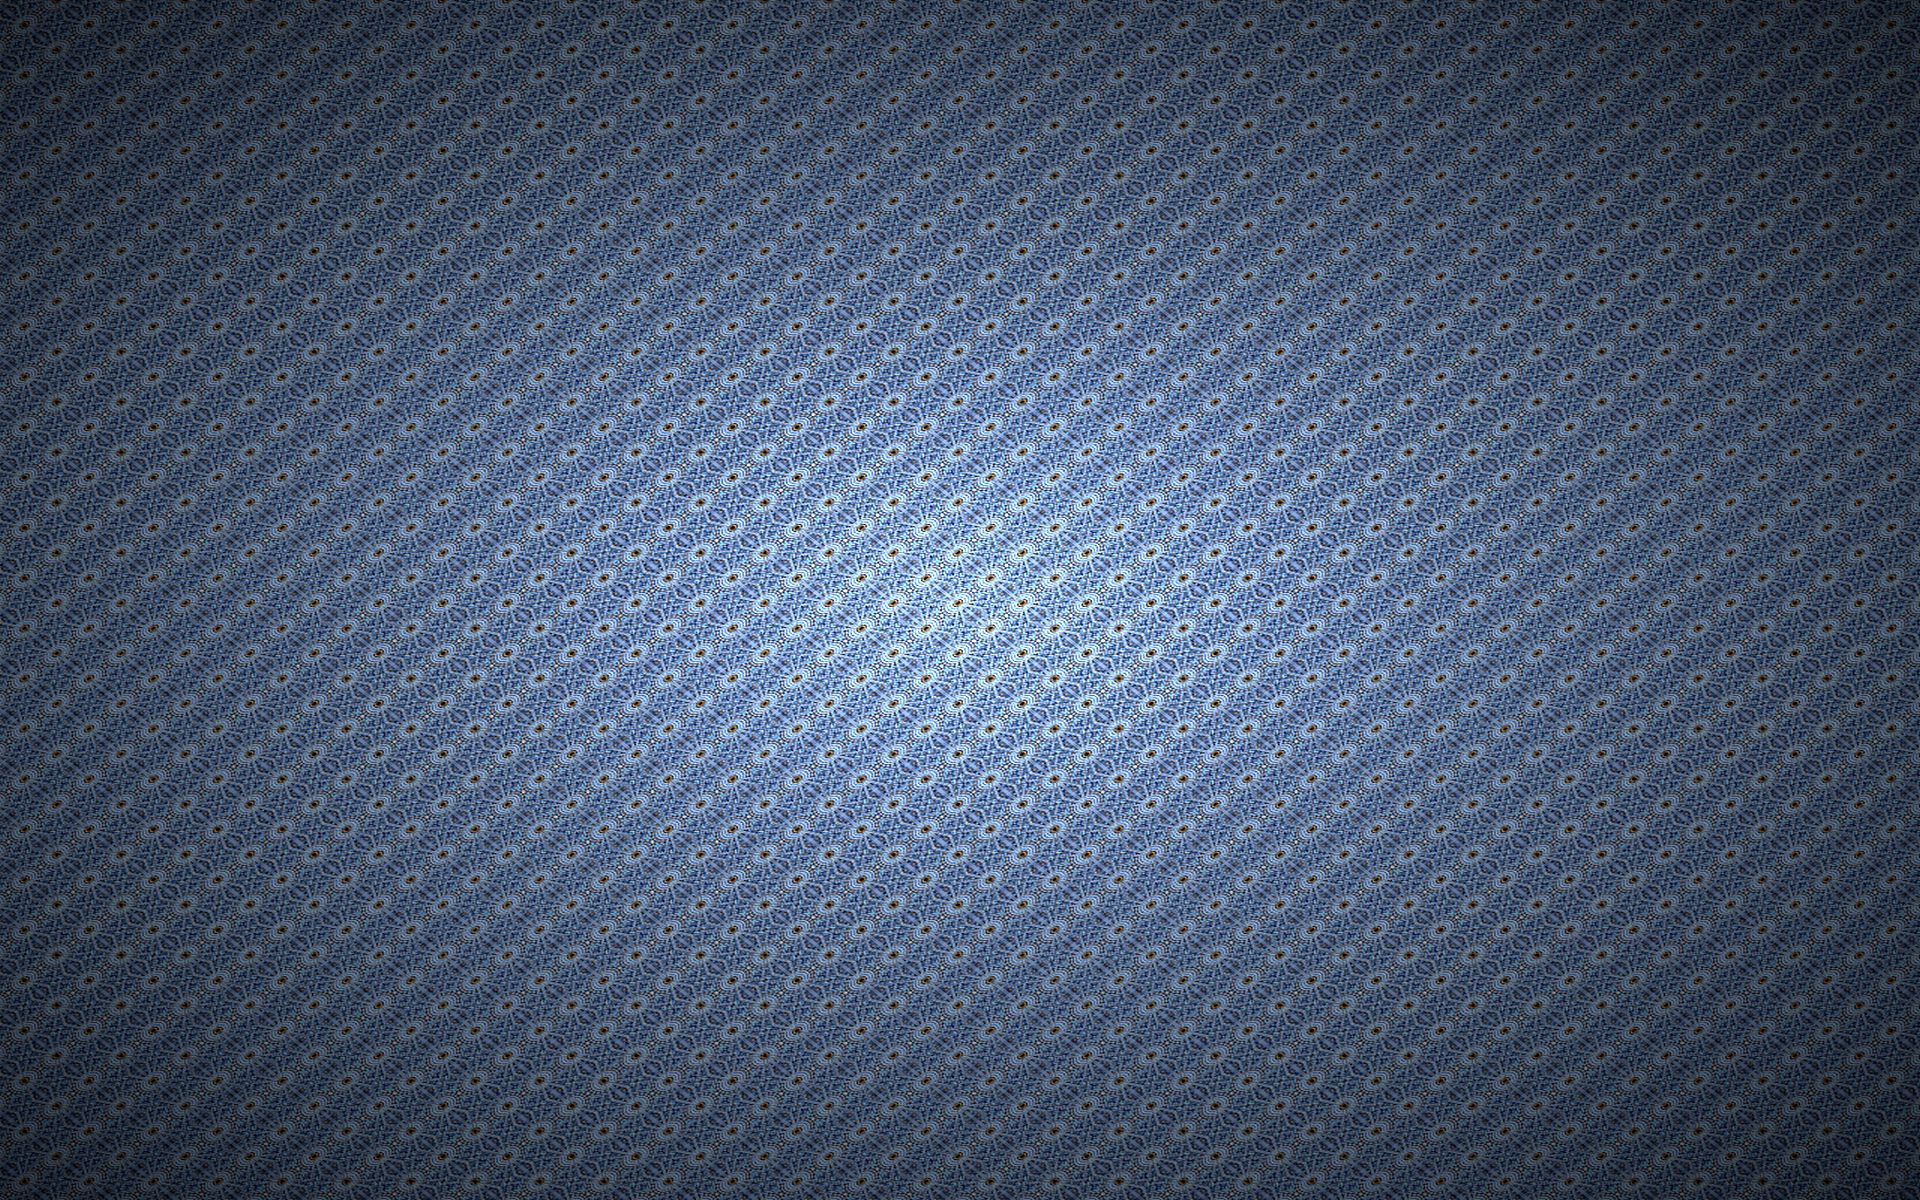 Wallpaper Full HD background, patterns, shine, light, texture, textures, grey, stains, spots